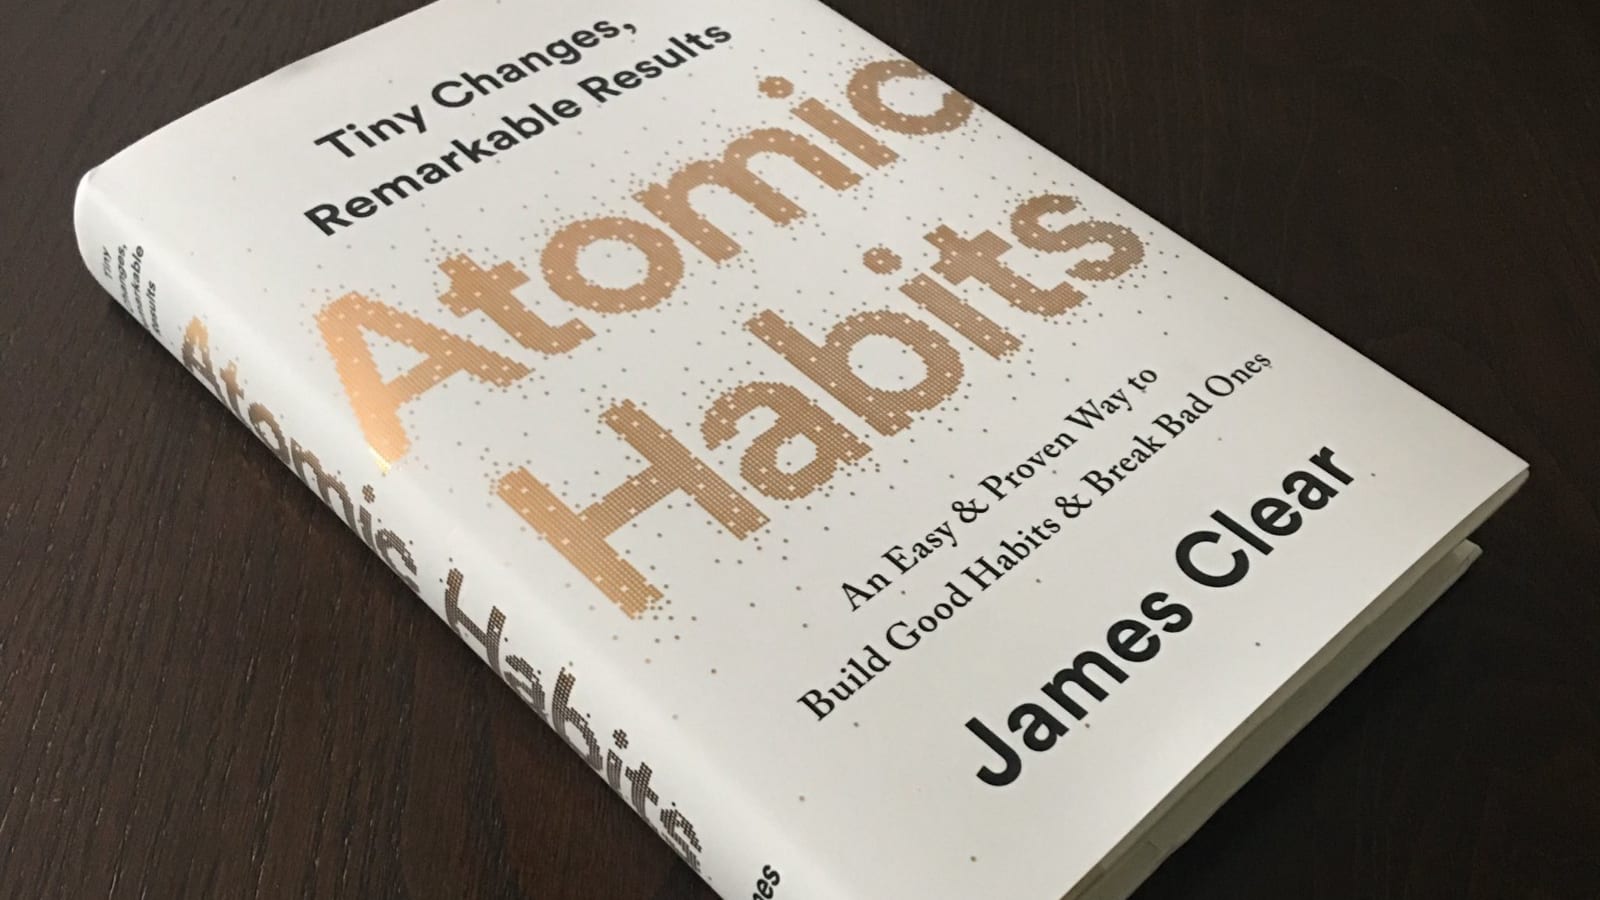 James Clear's "Atomic Habits